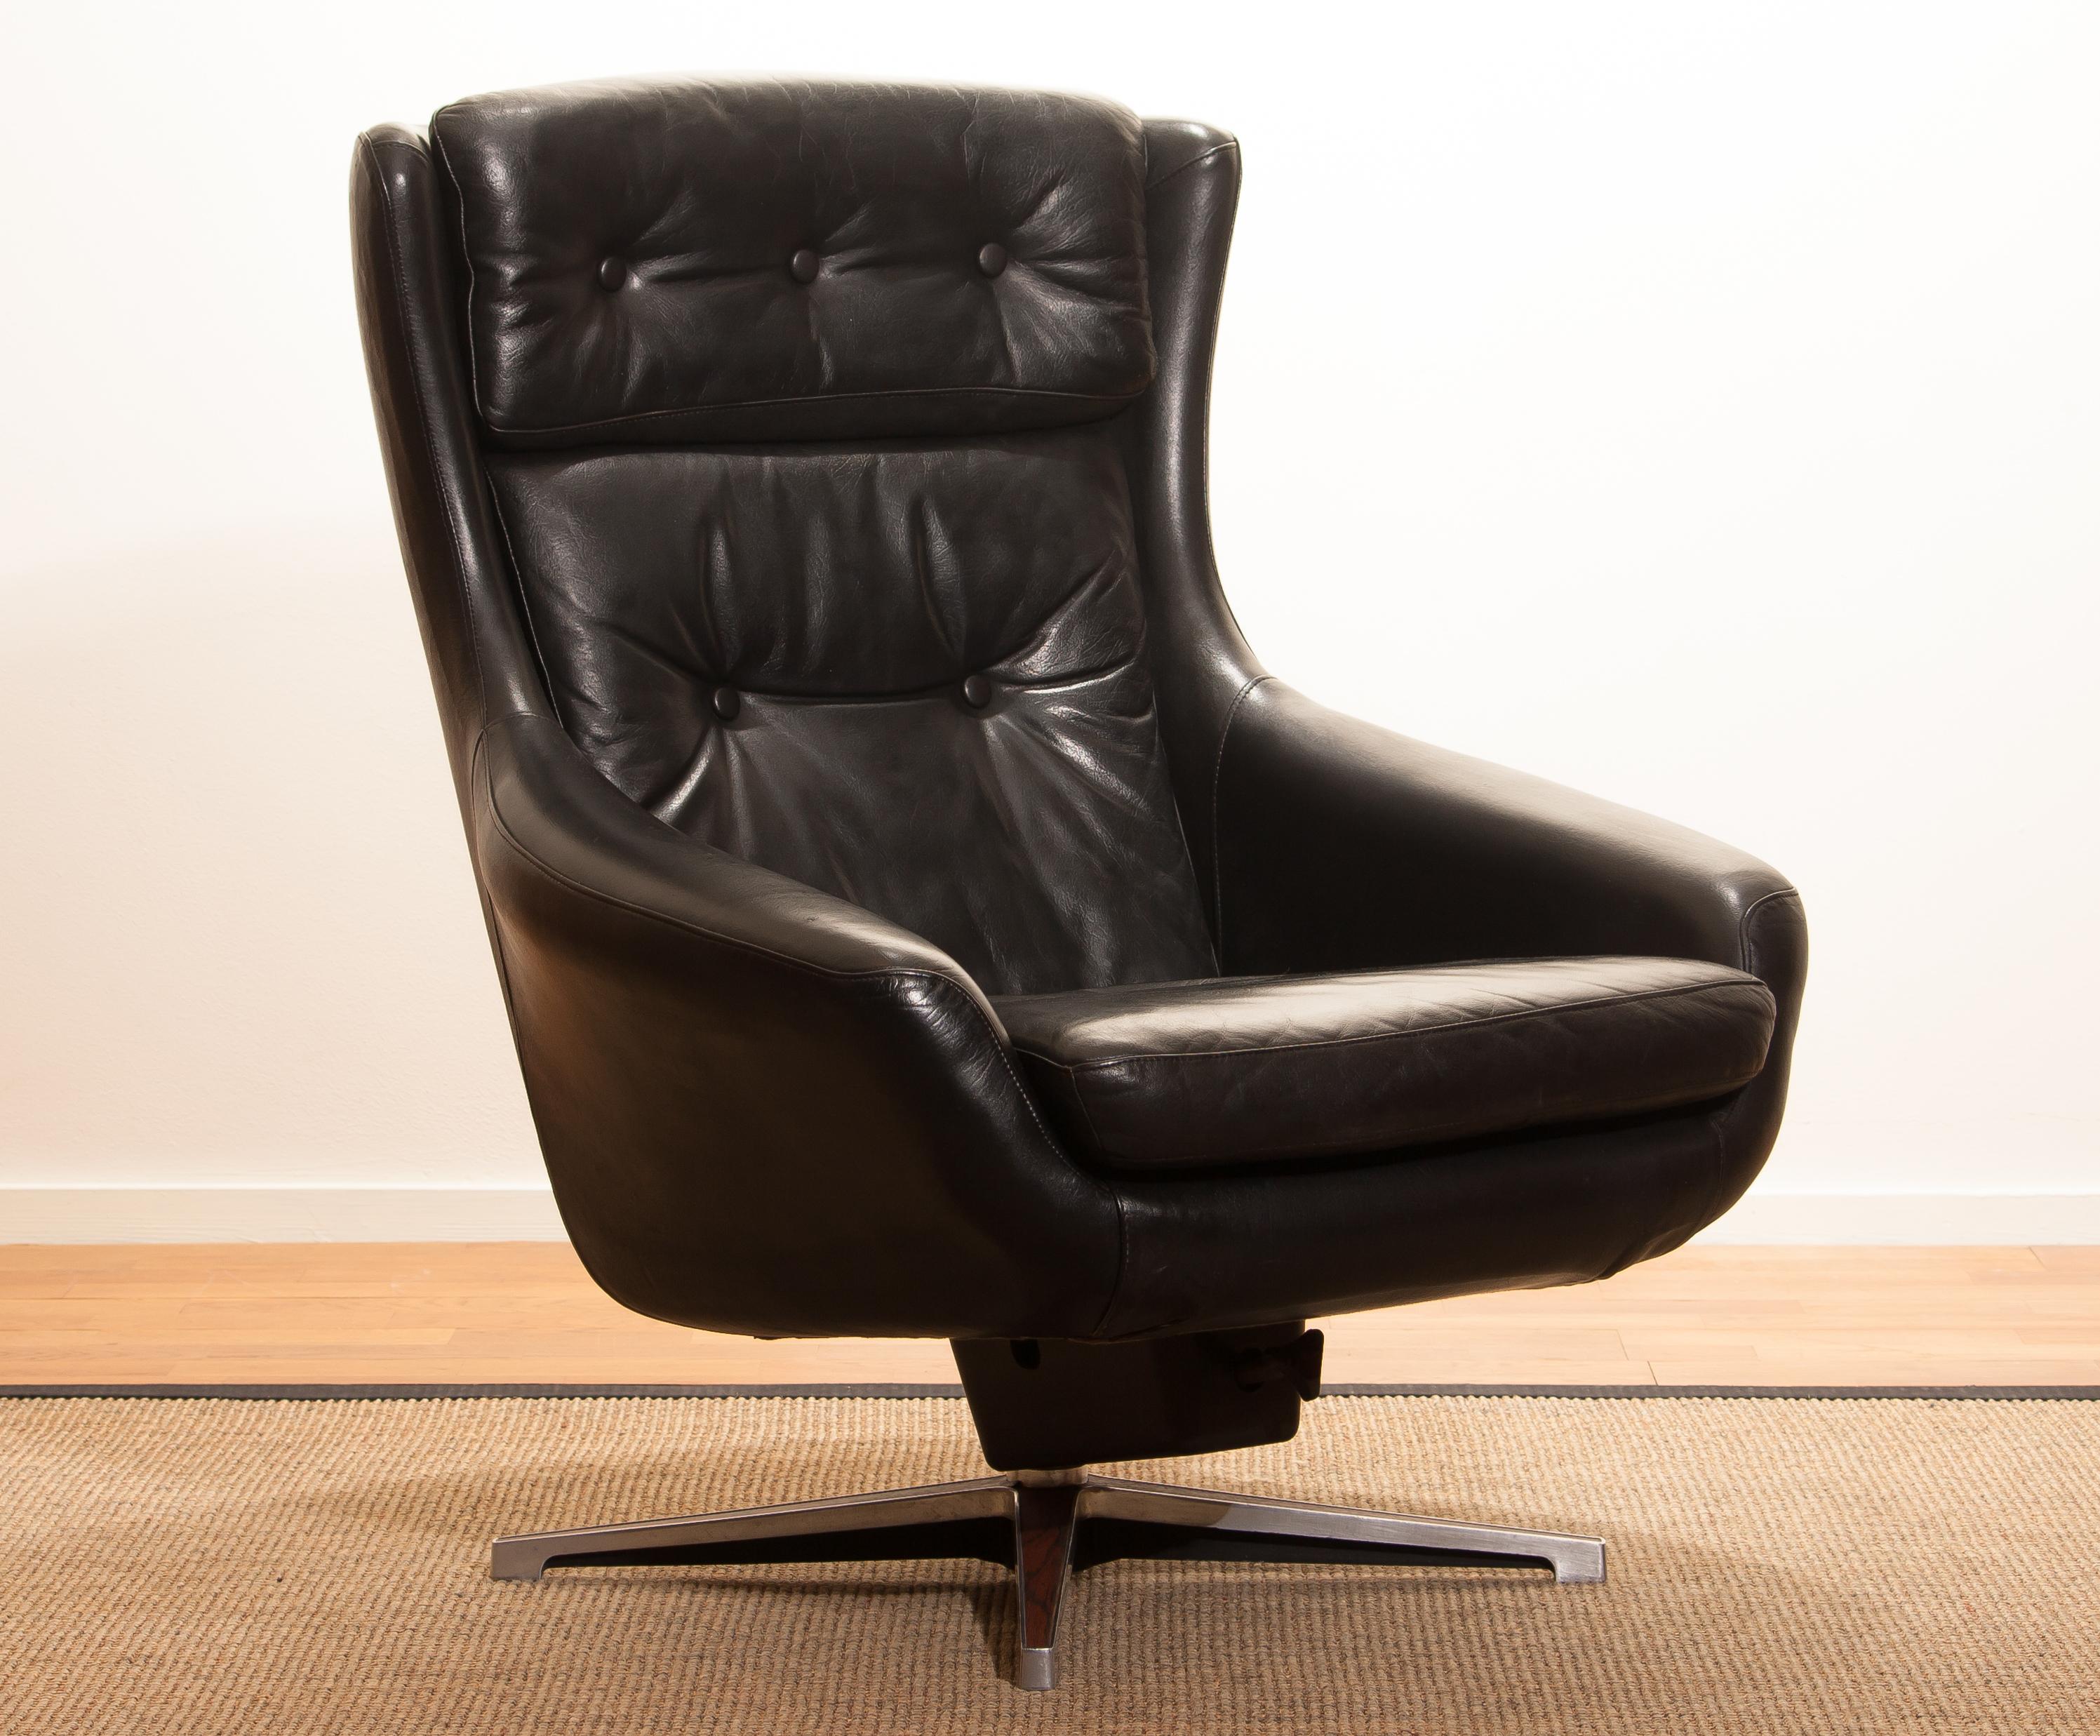 1960s, Leather Black Swivel Rocking Lounge Chair by Lennart Bender 14